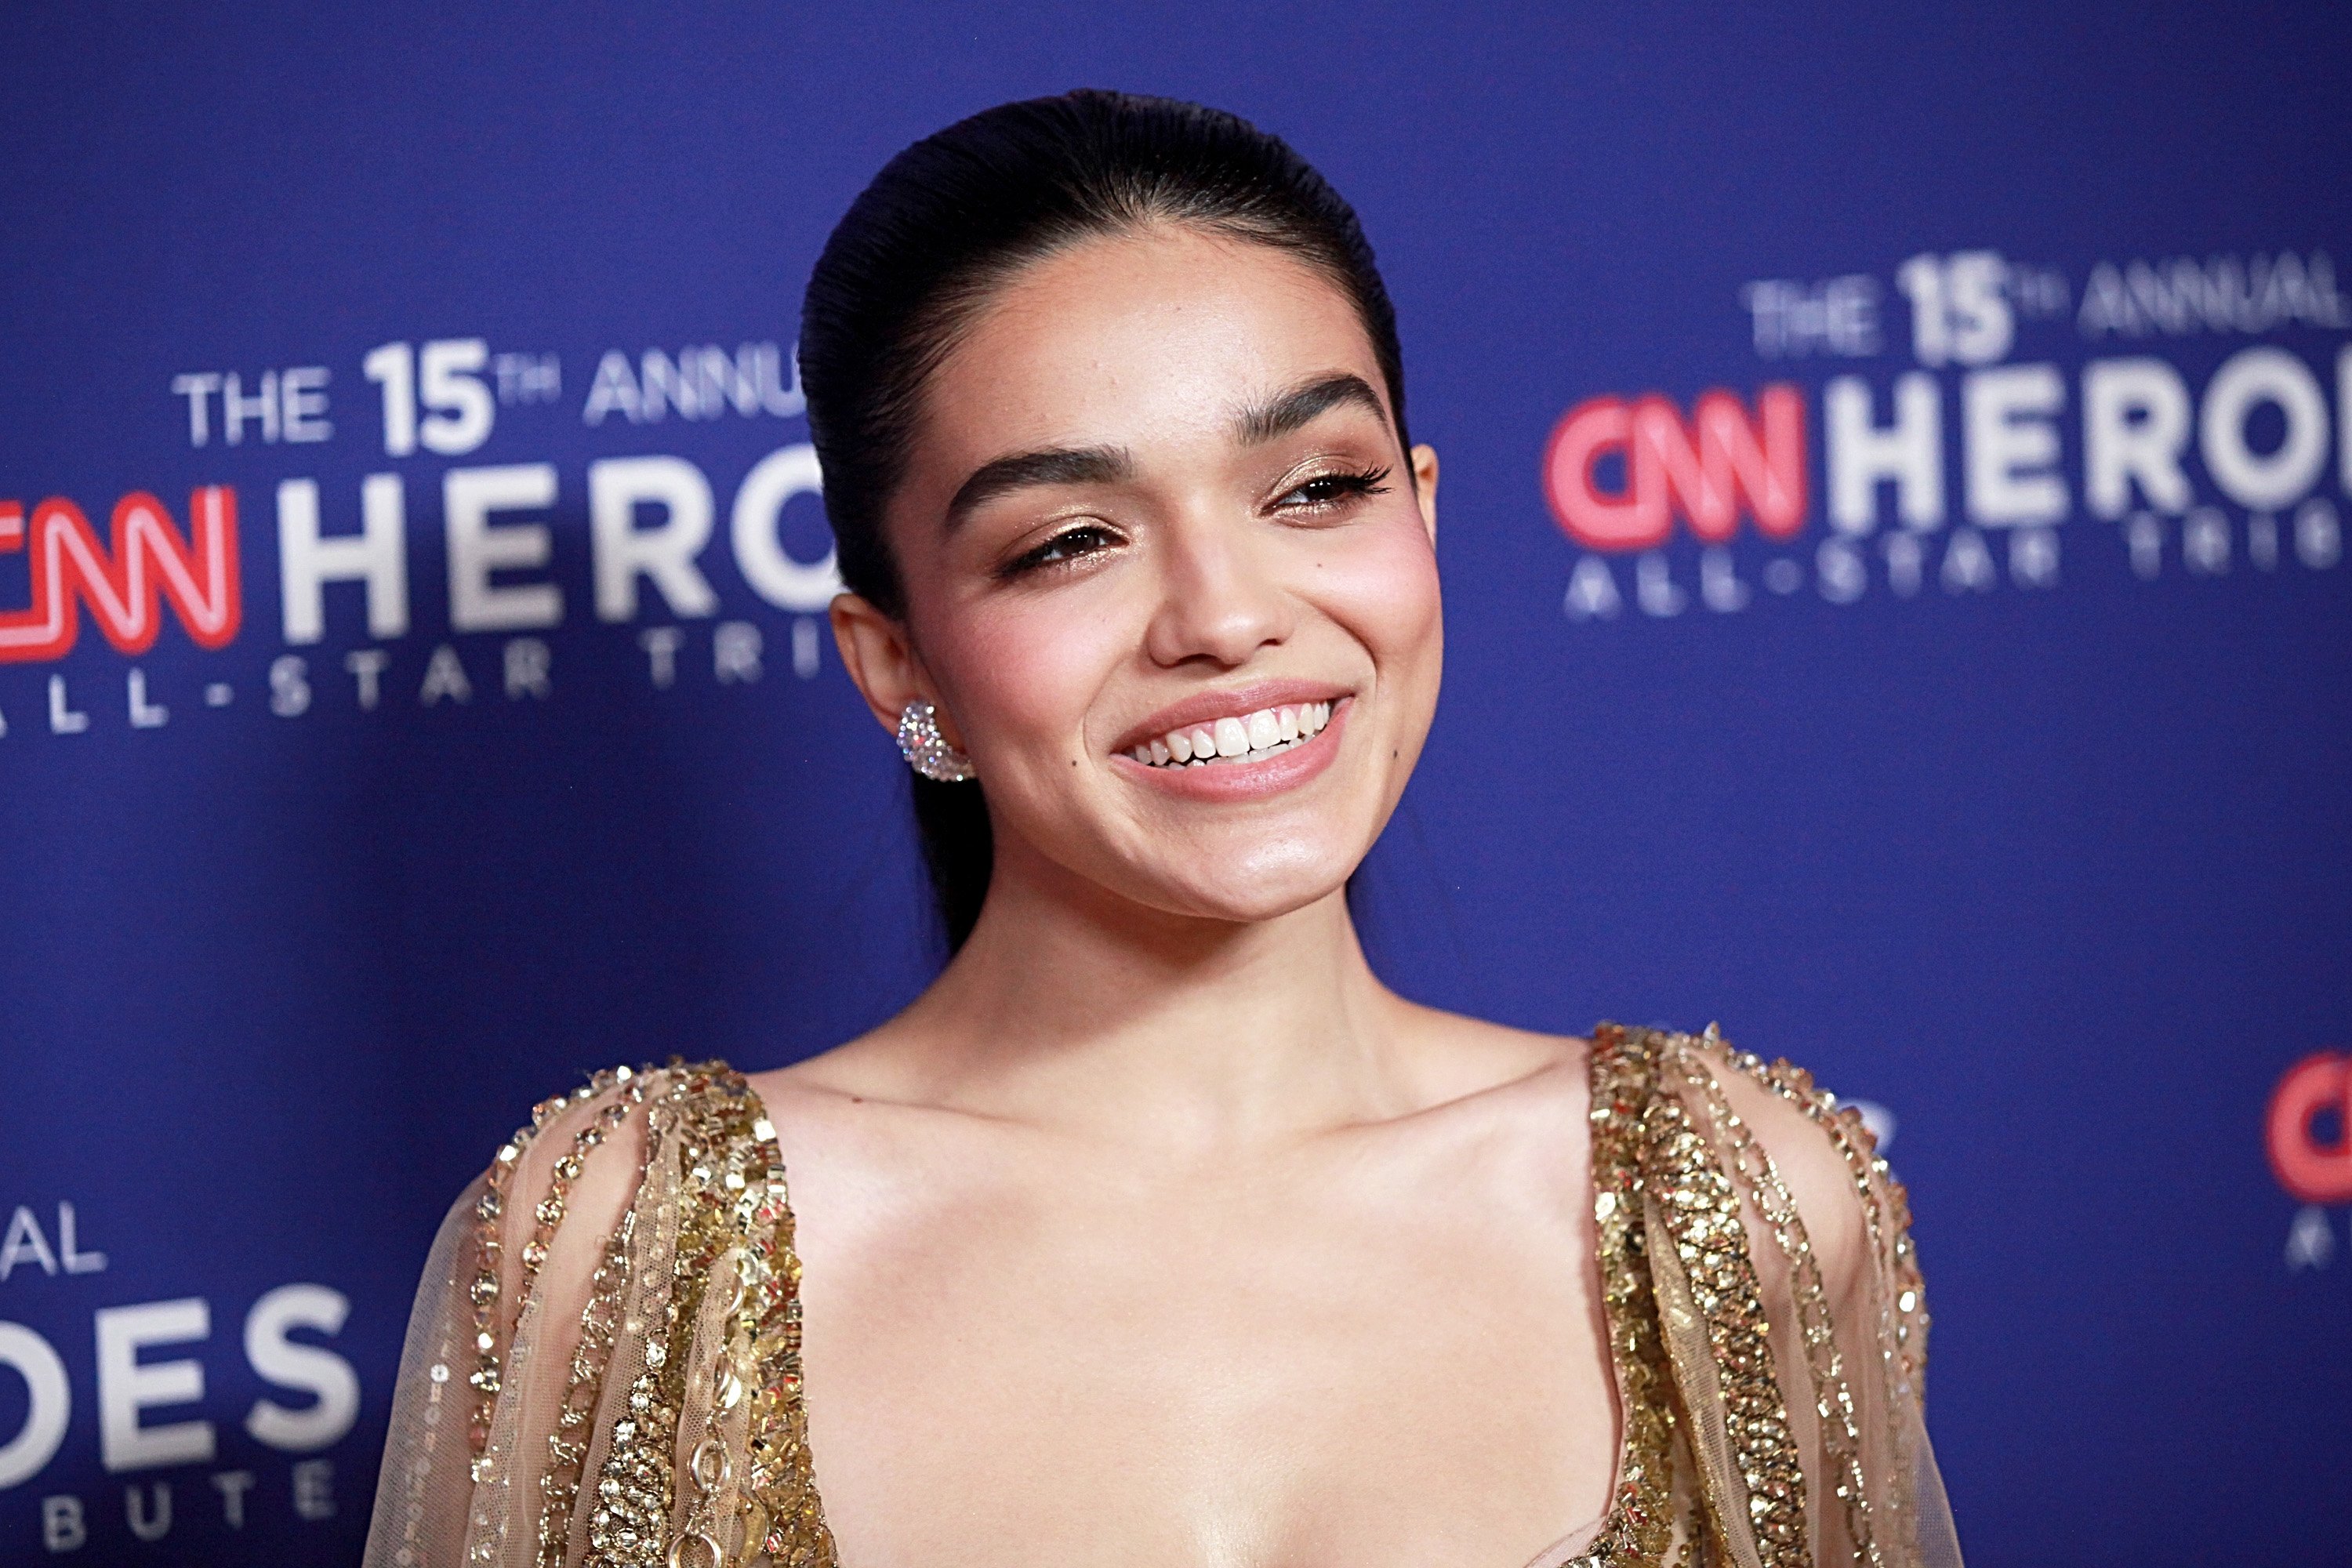 Rachel Zegler attends The 15th Annual CNN Heroes: All-Star Tribute at American Museum of Natural History